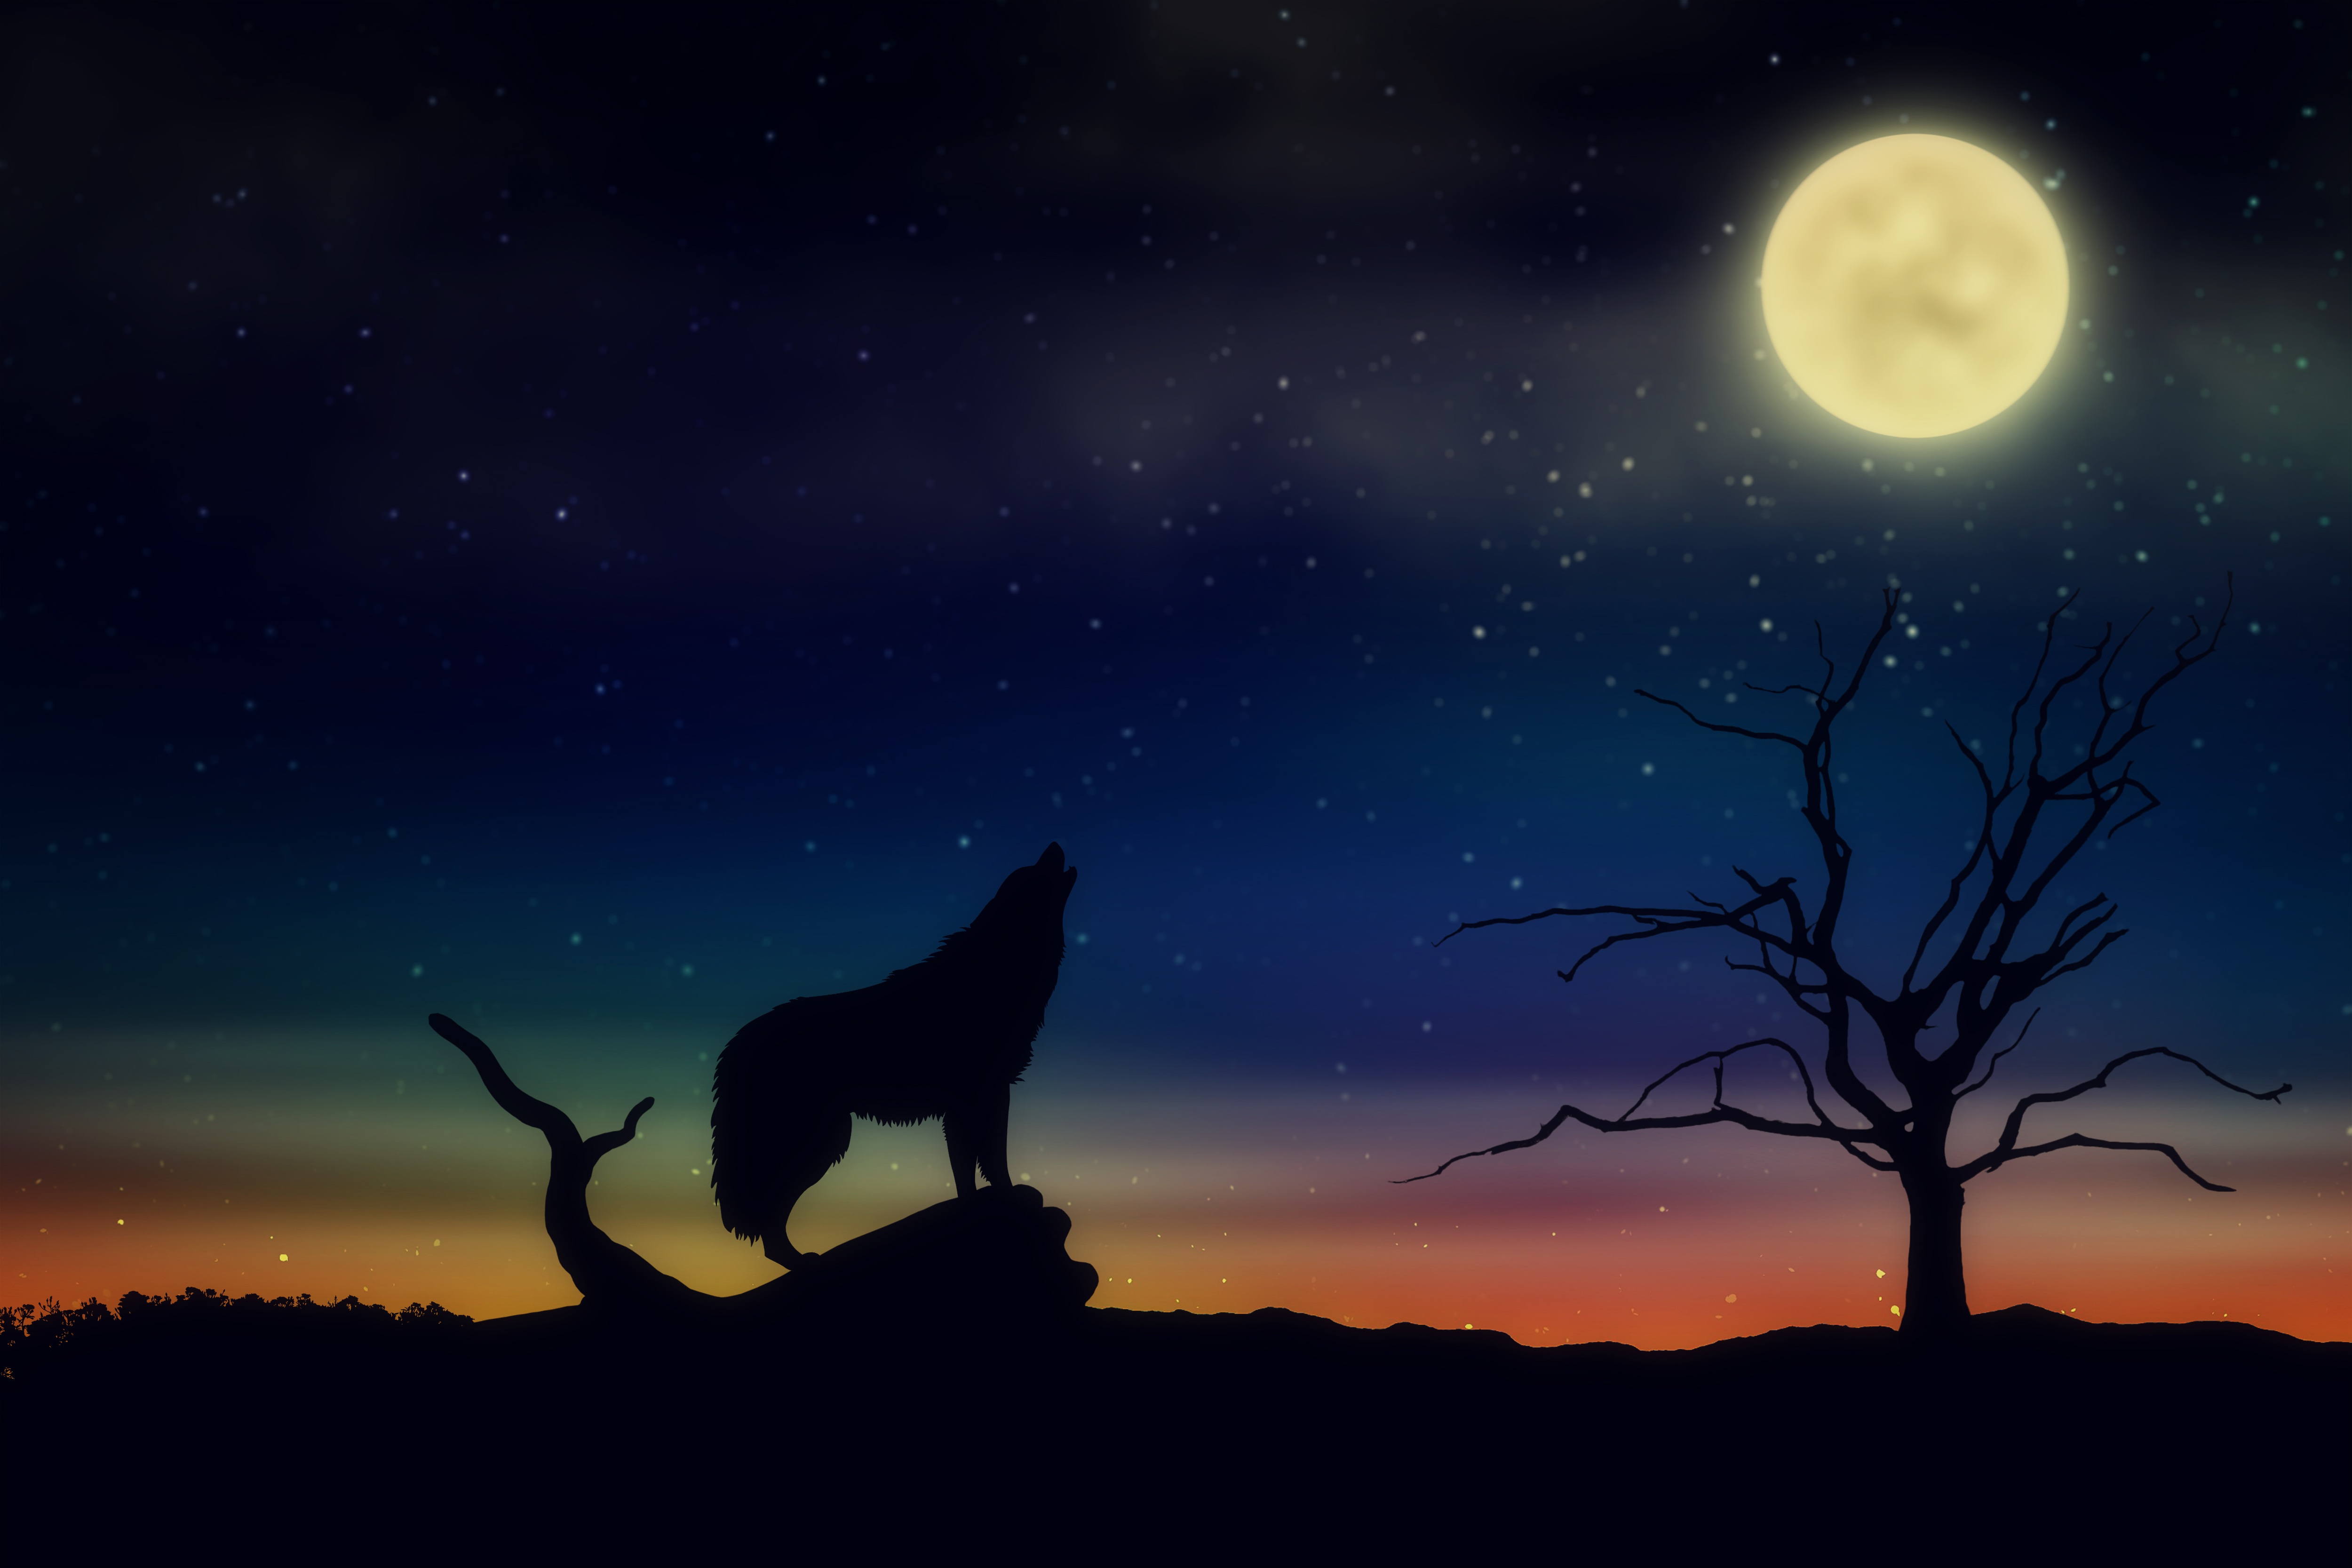 Fantasy Wolf Howling at the Moon by DarkWorkX